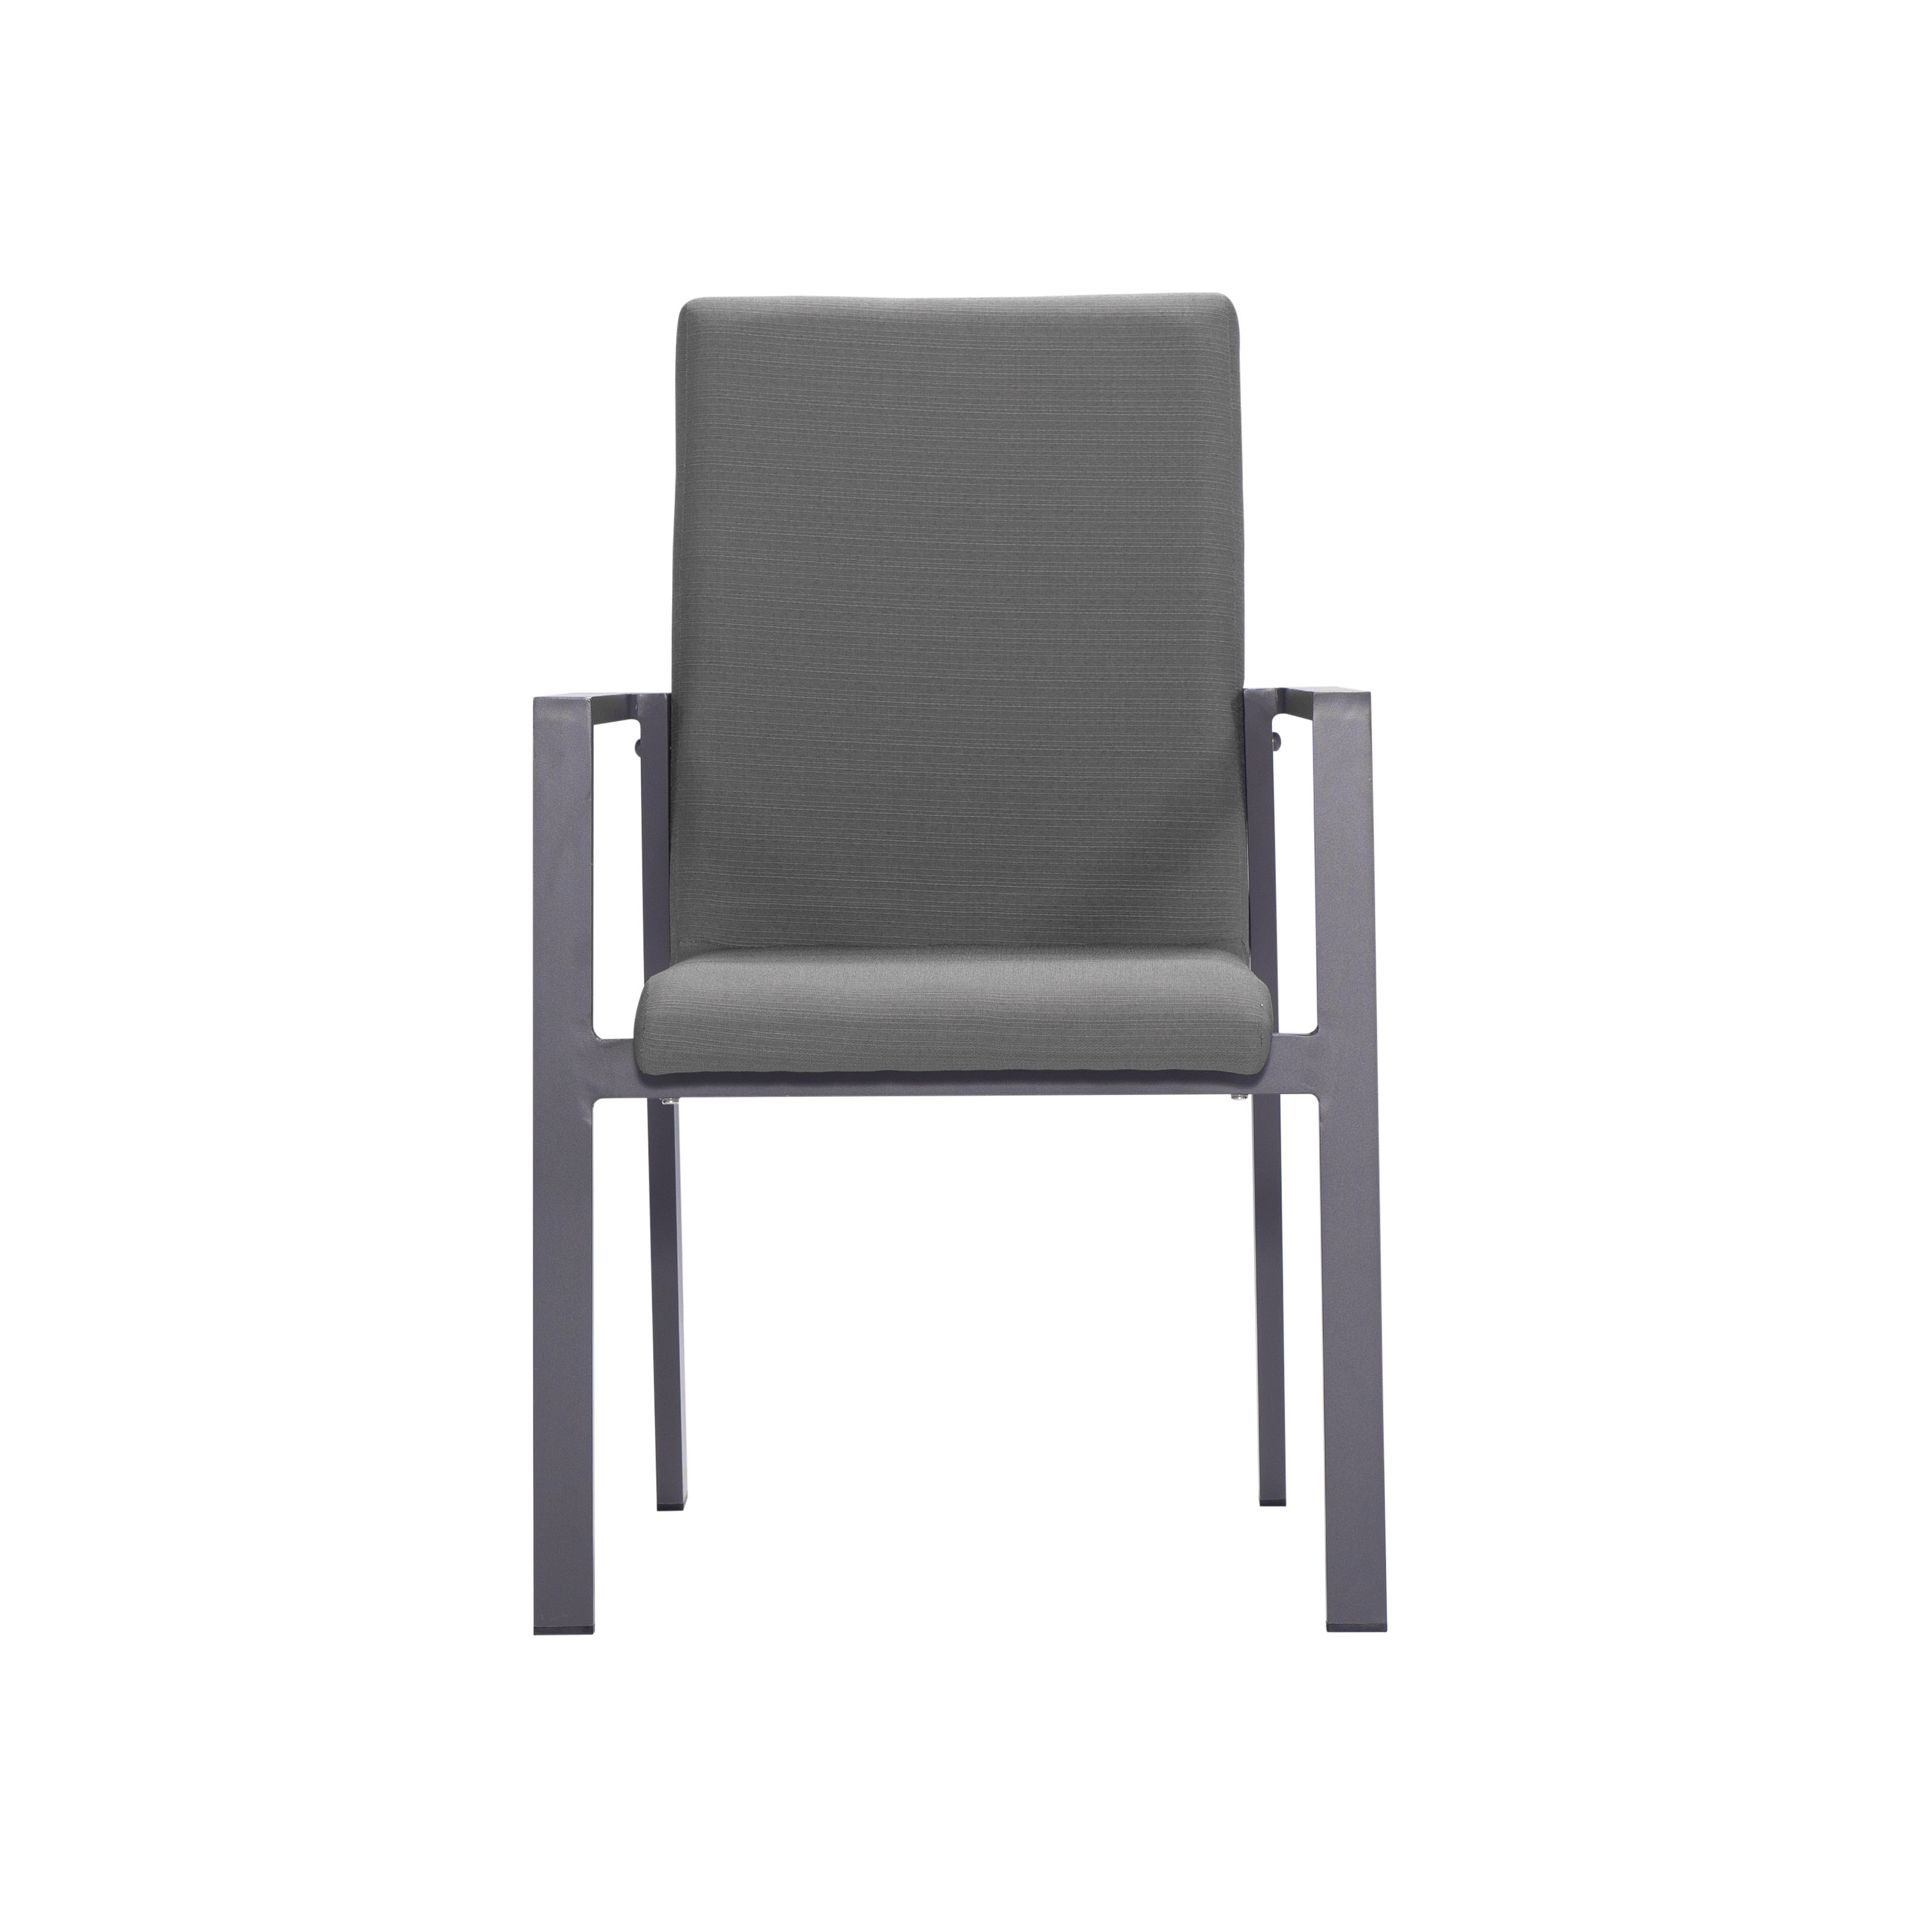 Louis dining chair S2